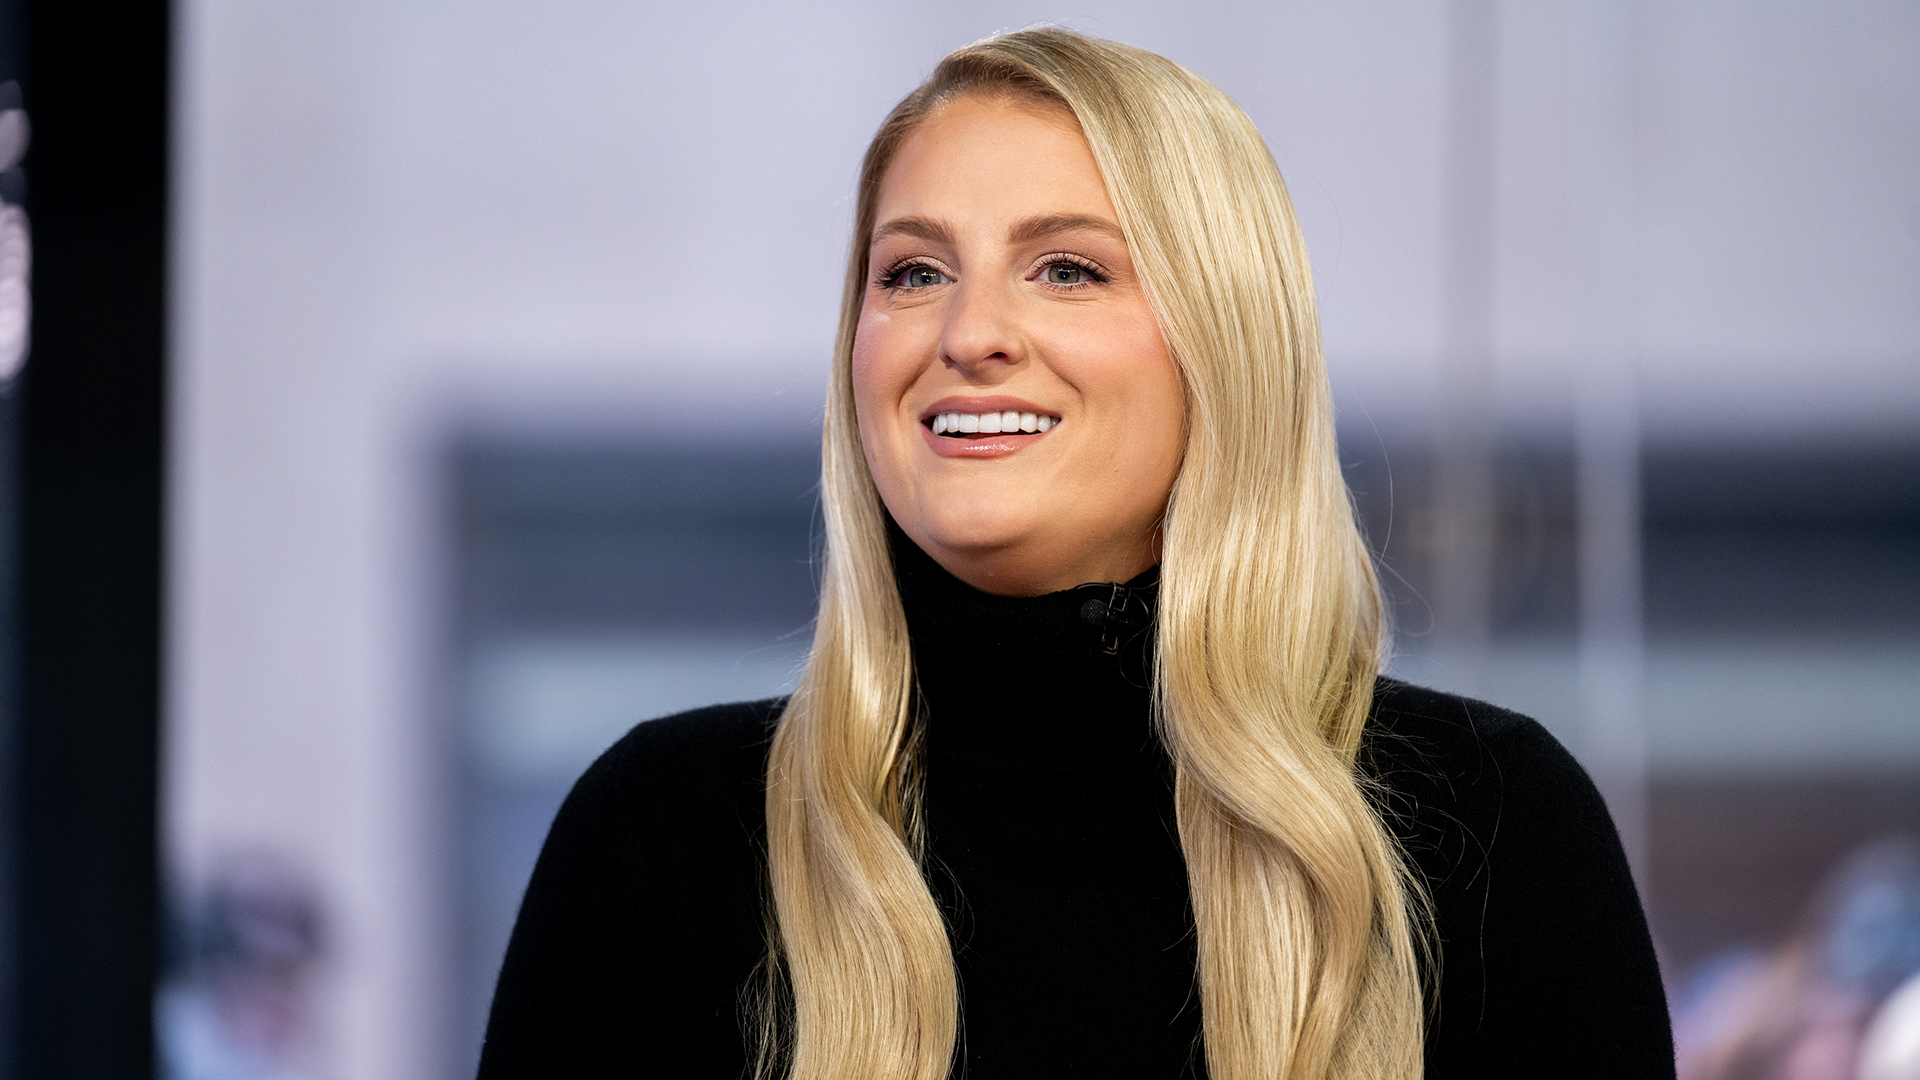 Meghan Trainor on new 'Timeless' album, planning to tour with kids